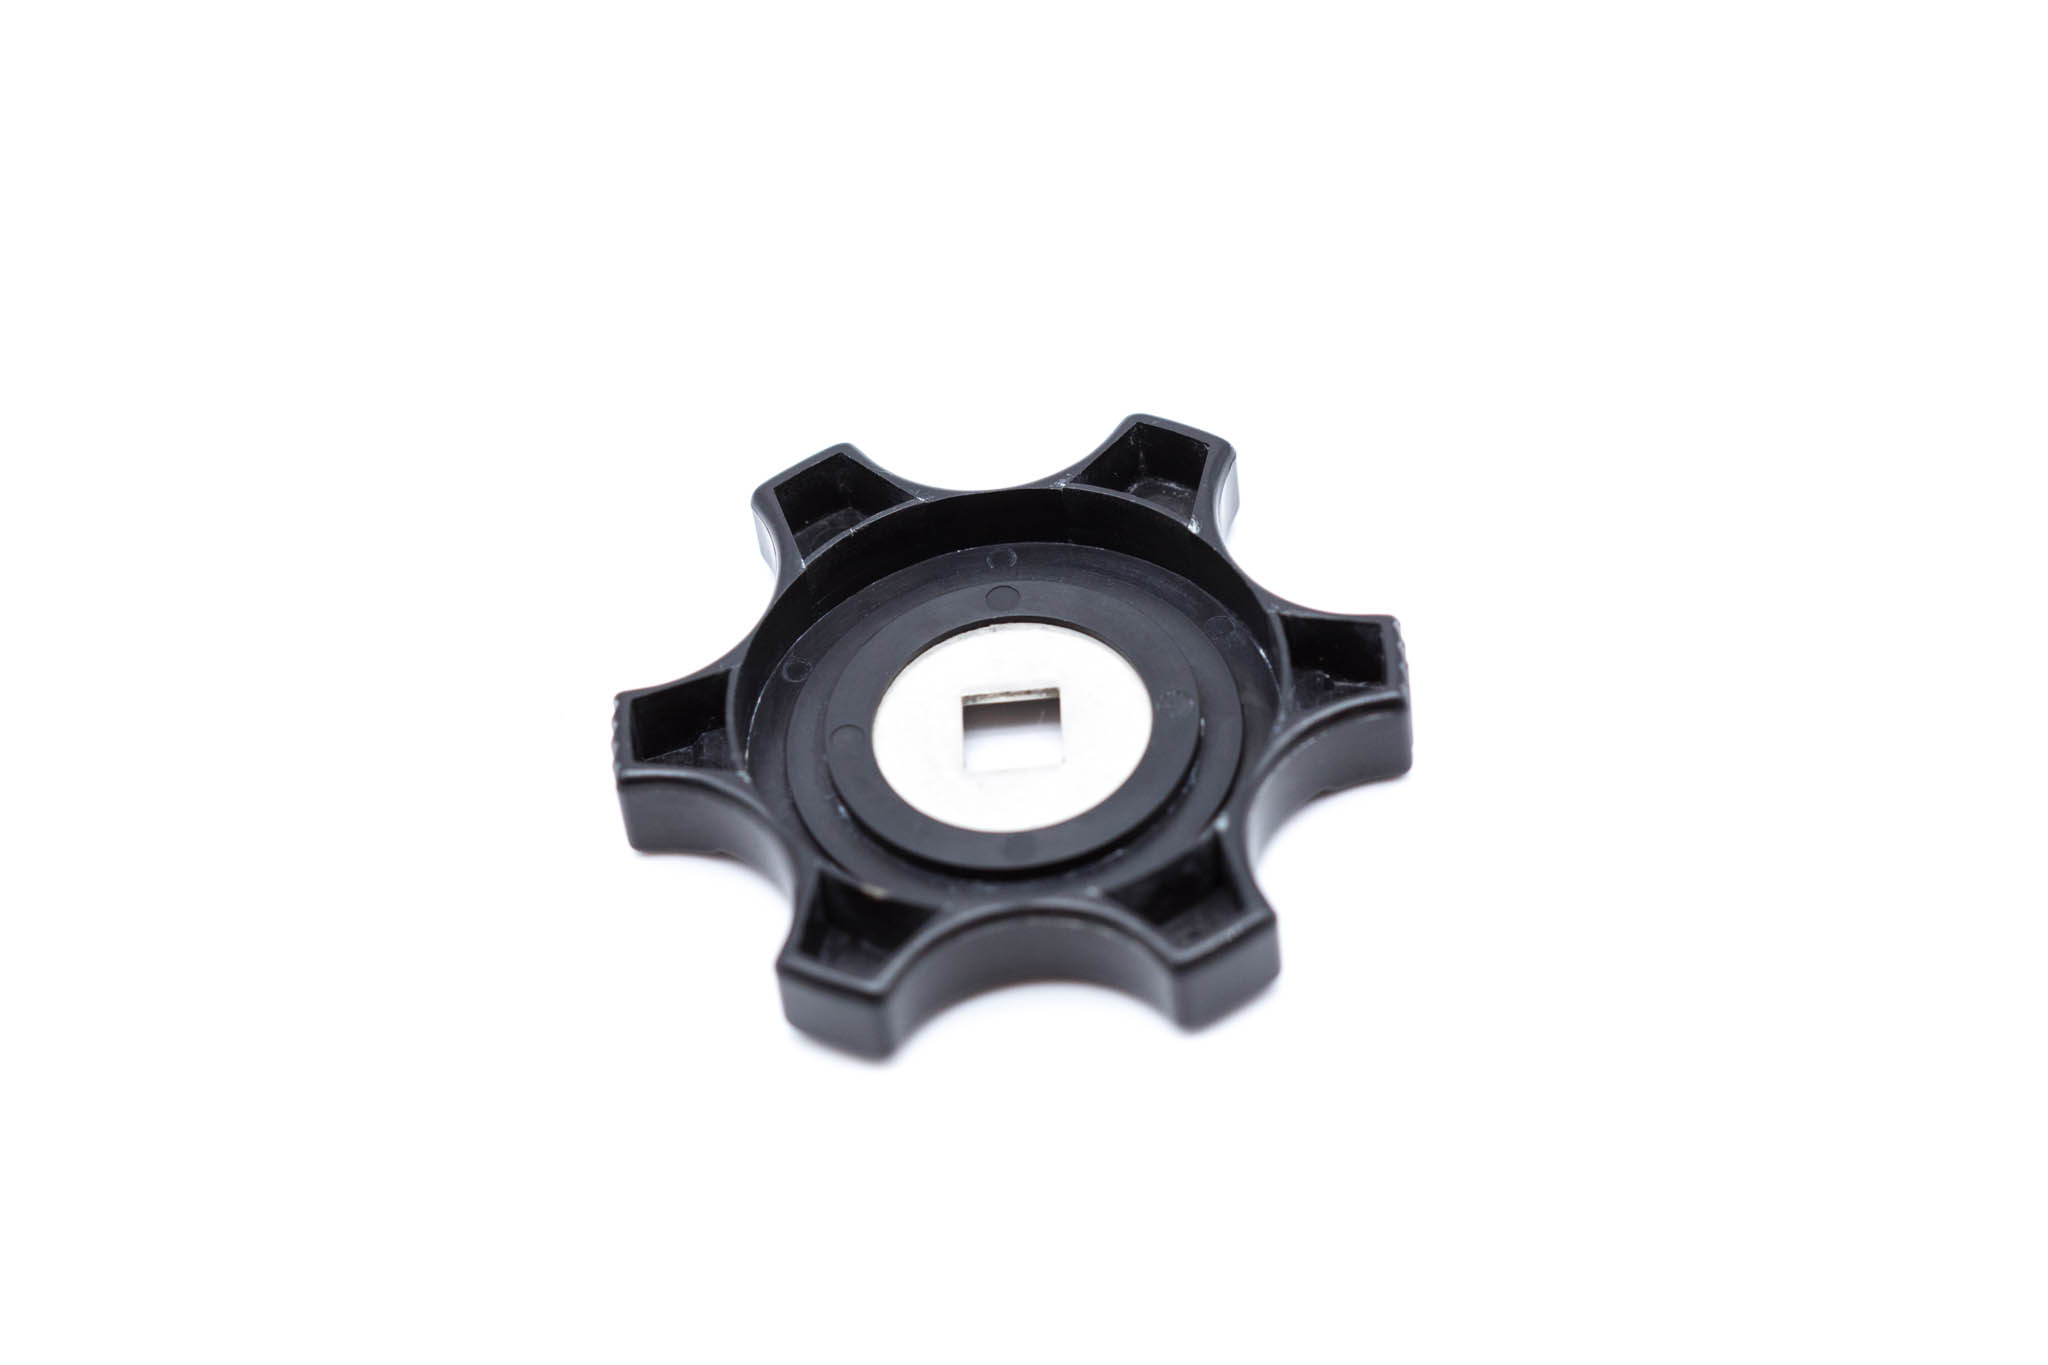 OEM Control Knob (Up/Down) Face Cover - OSF, OSF-2, OSF-35